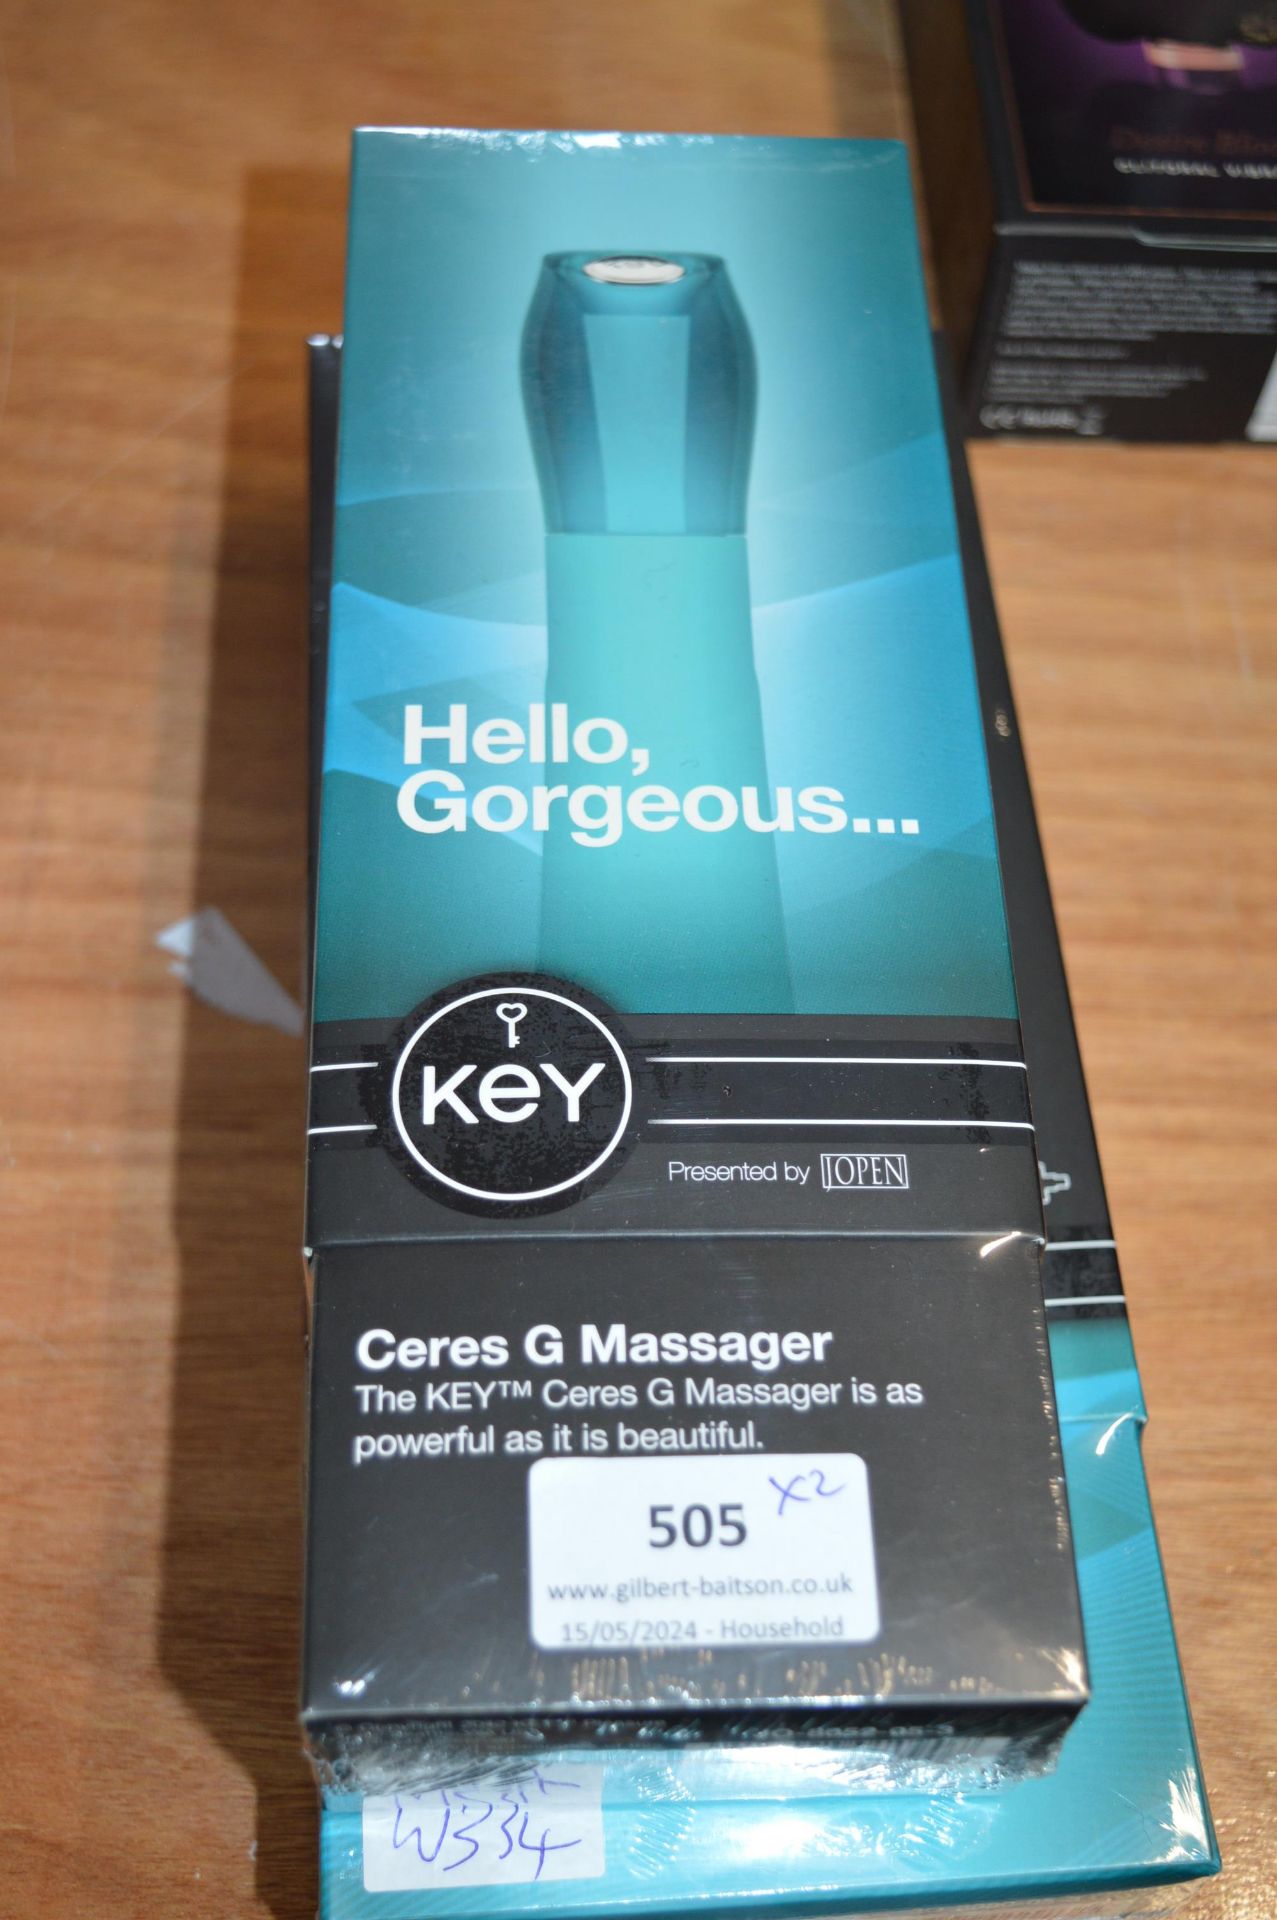 Two Key Personal Massagers (0ver 18's only)